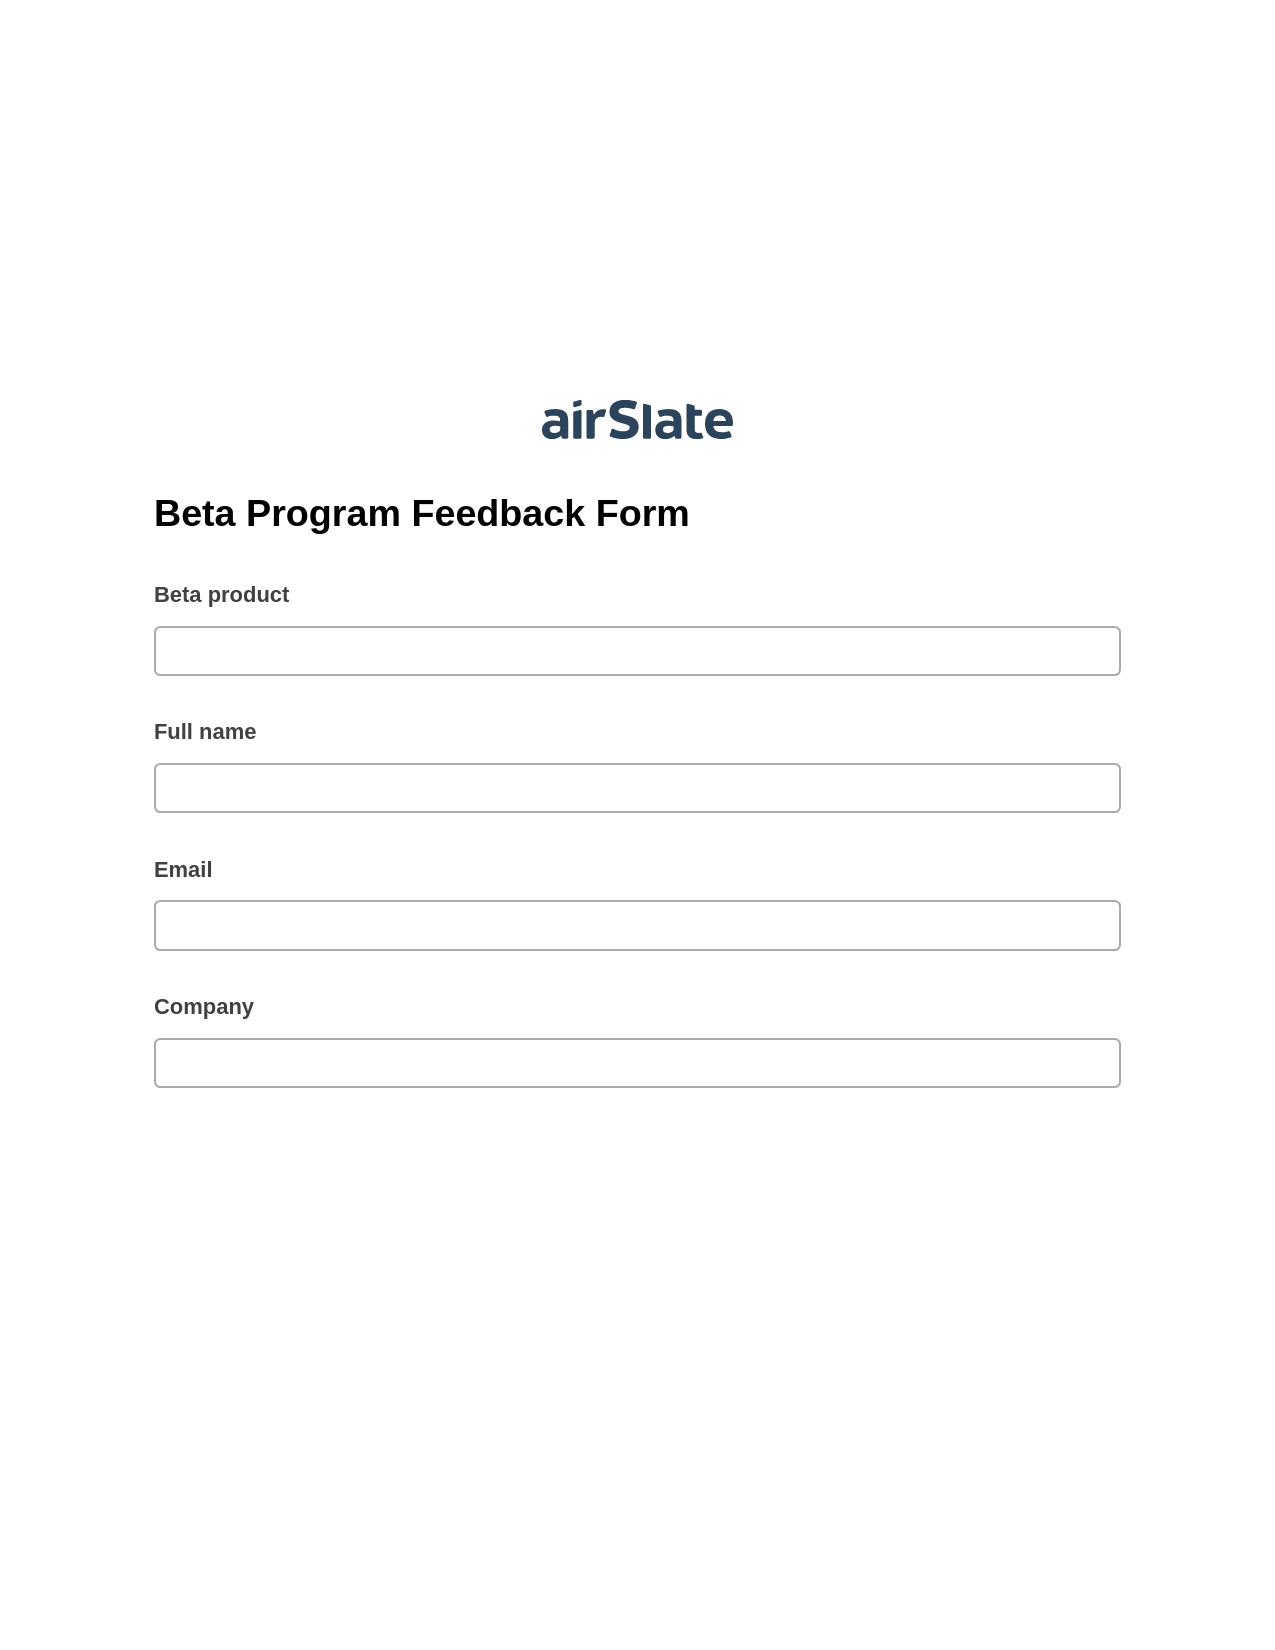 Beta Program Feedback Form Pre-fill from CSV File Bot, Jira Bot, Export to Excel 365 Bot